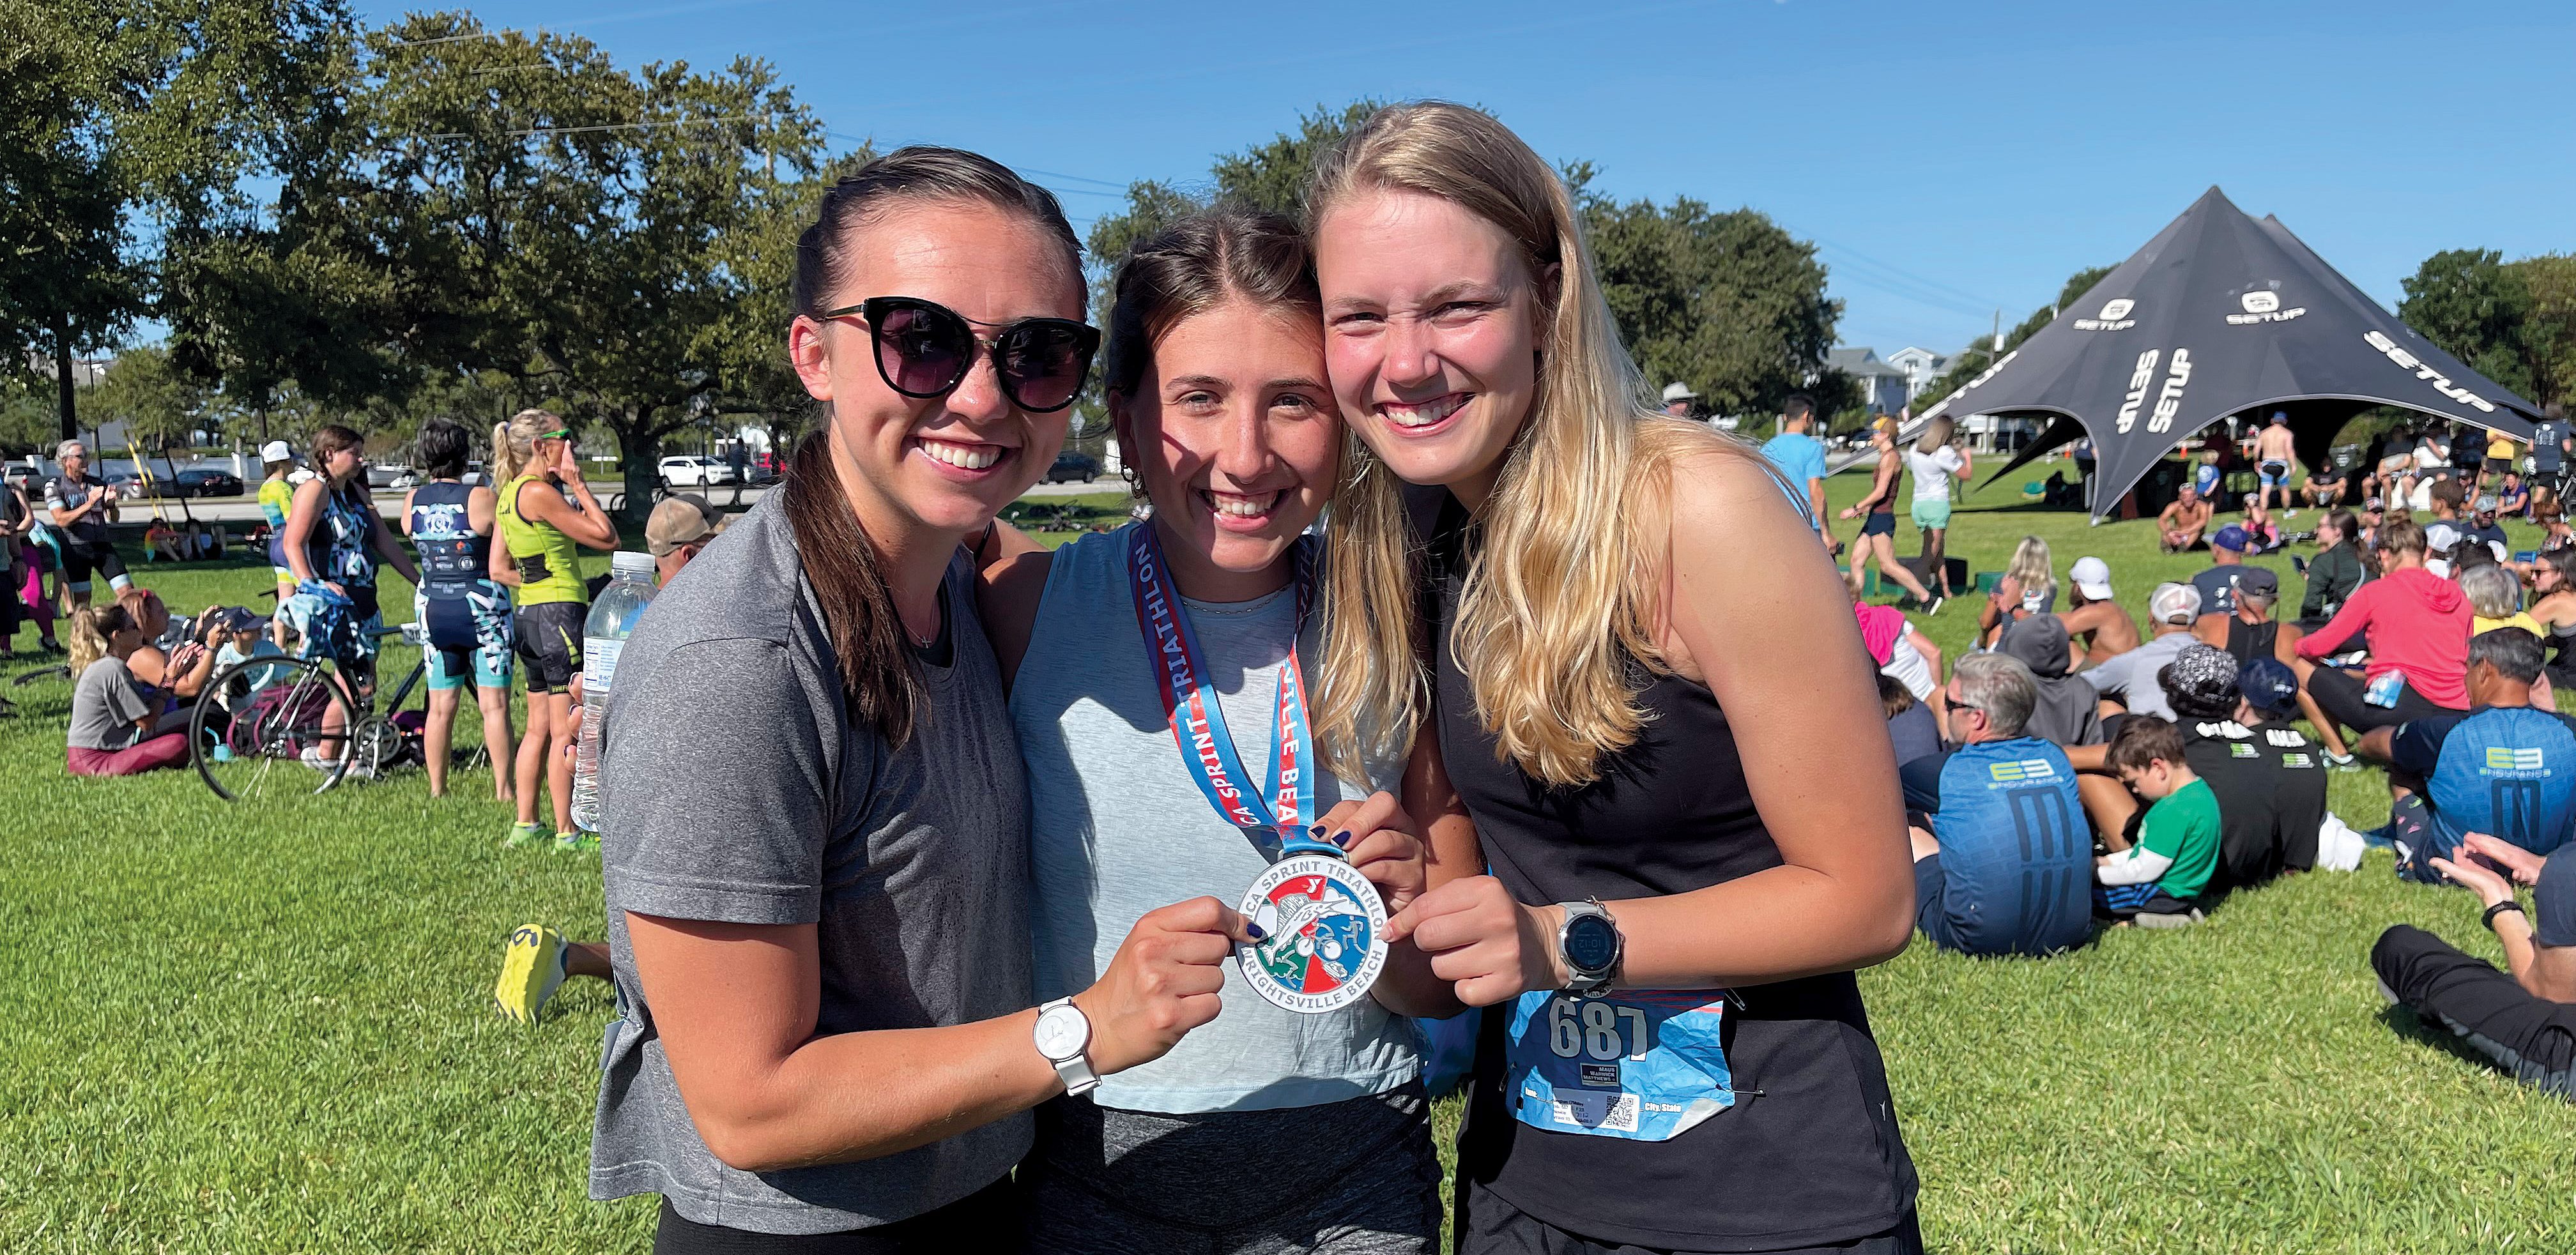 Nicole Marshall ’17, Victoria Marshall ’20, and Meghan O’Malley ’20 completed the YMCA Wrightsville Beach Sprint Triathlon